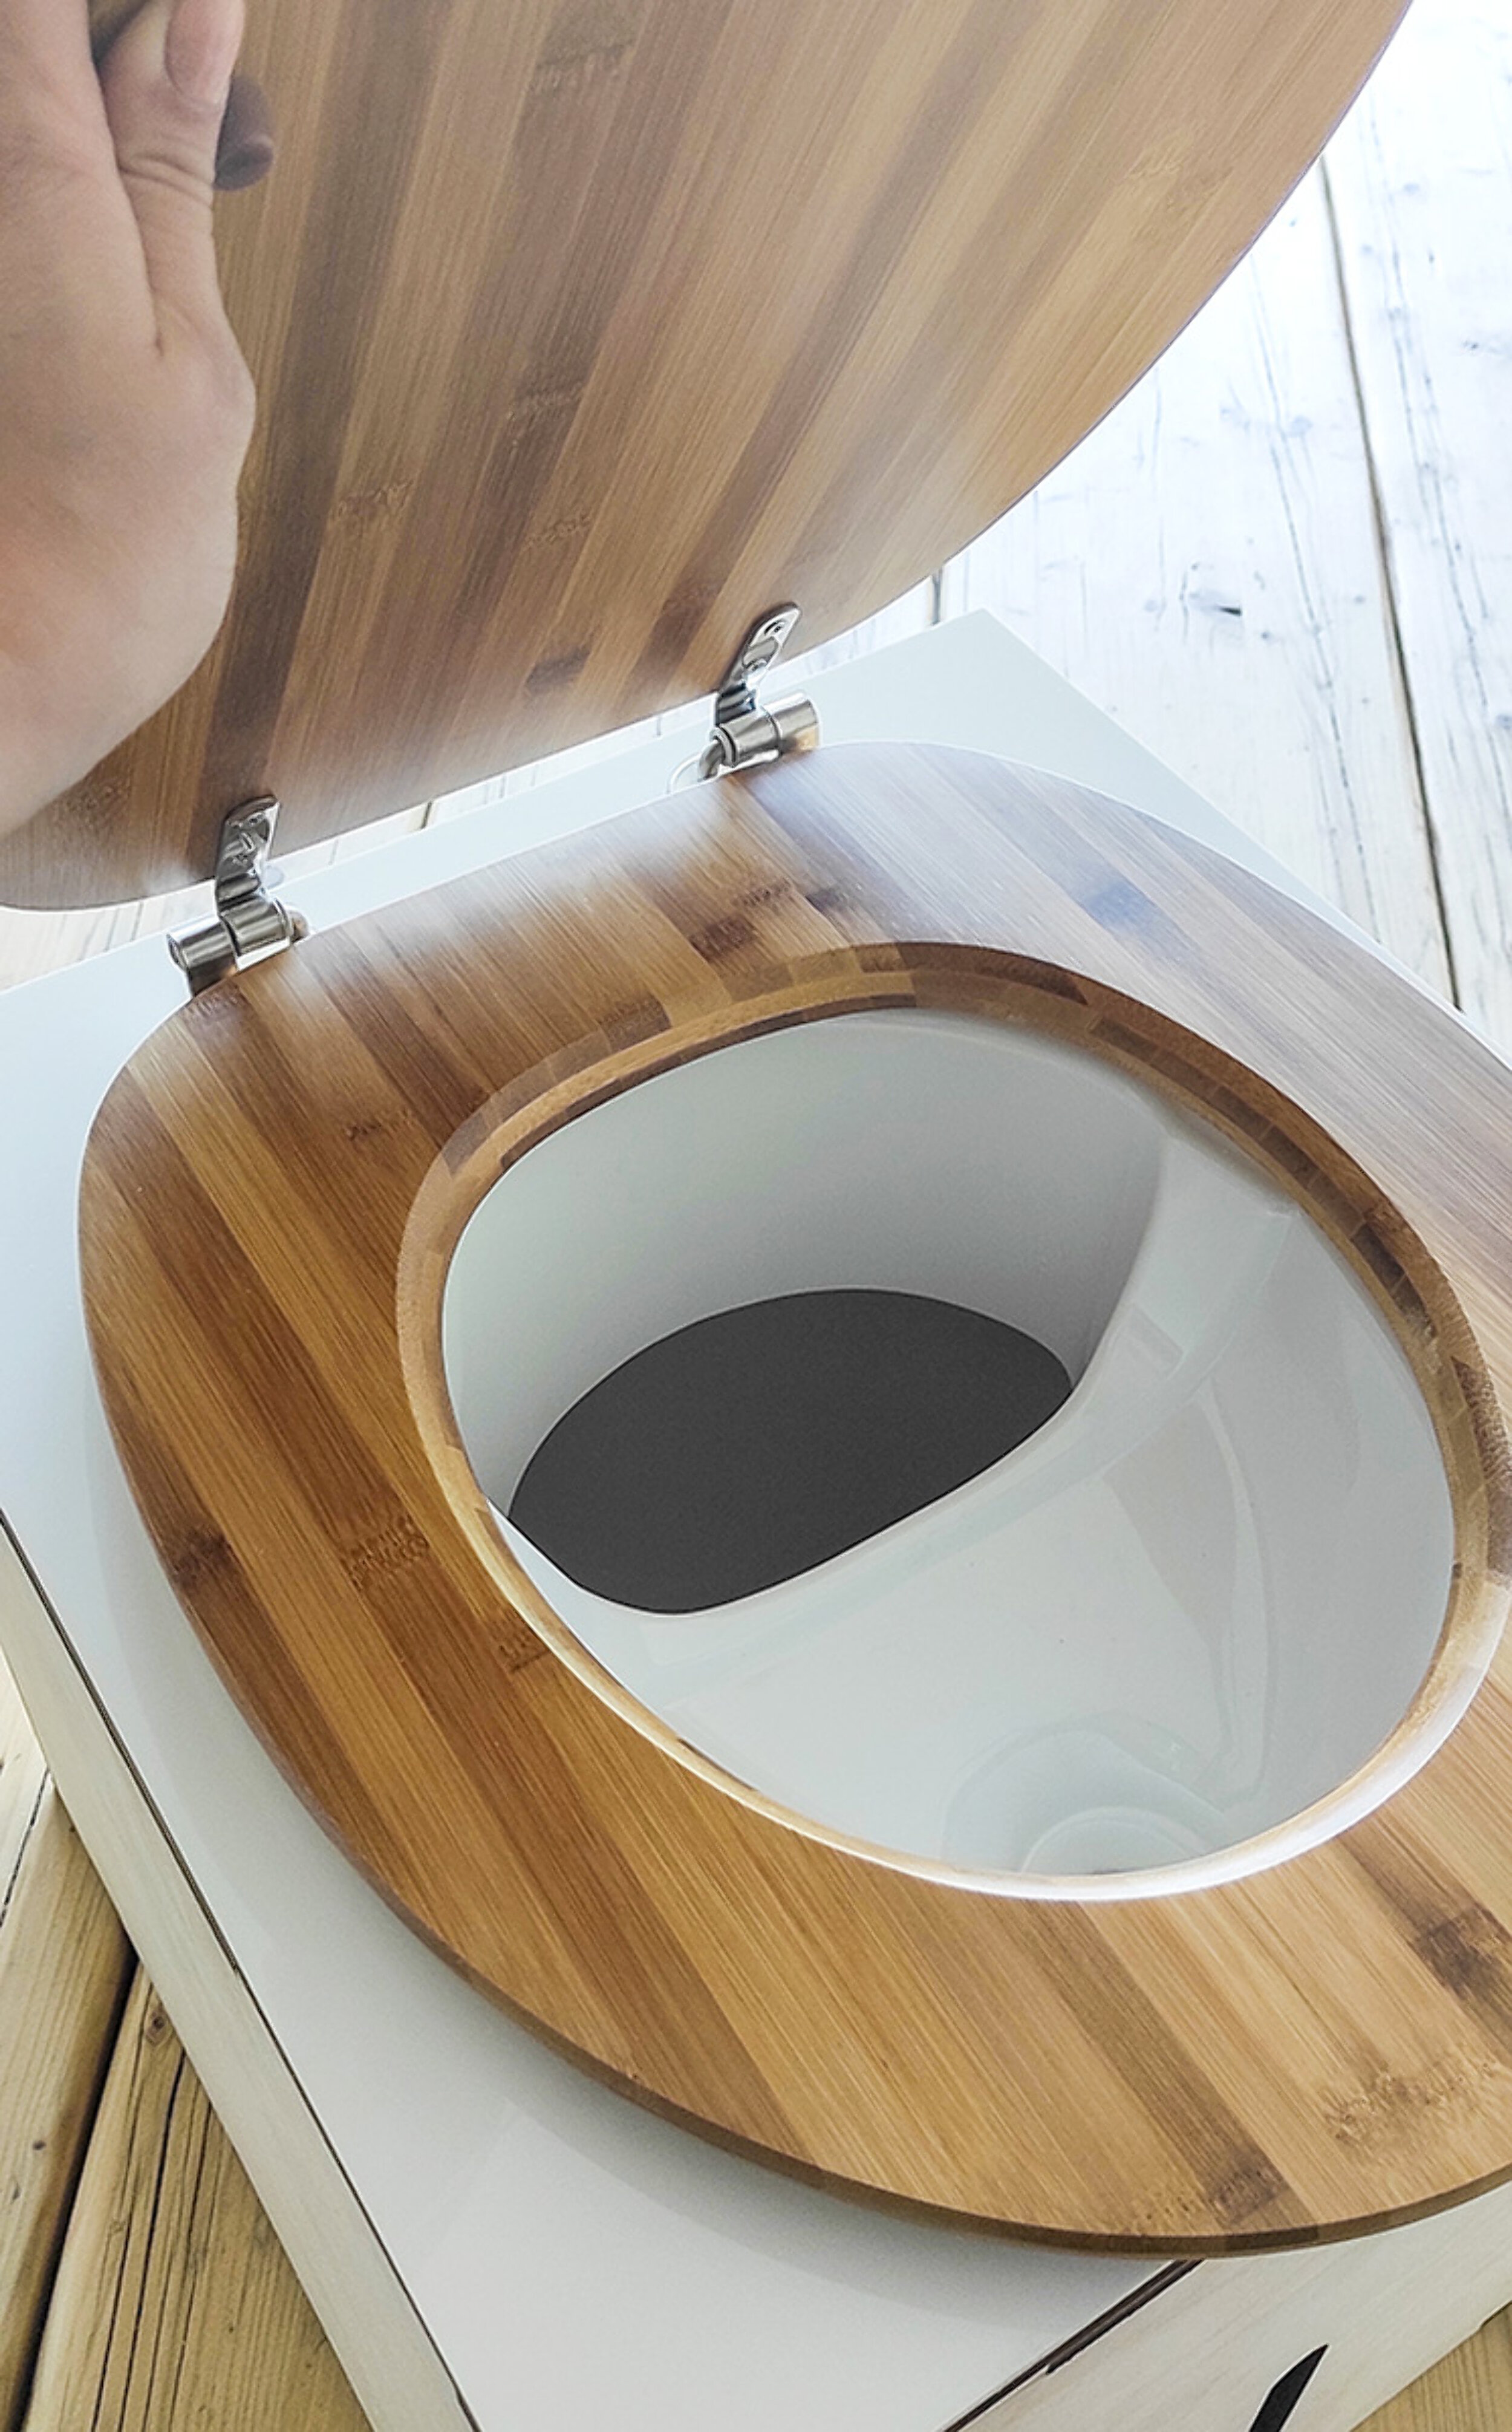 Our bamboo toilet seat with adjustable stainless steel hinges fits perfectly on the Kildwick urine separator and is easy to assemble